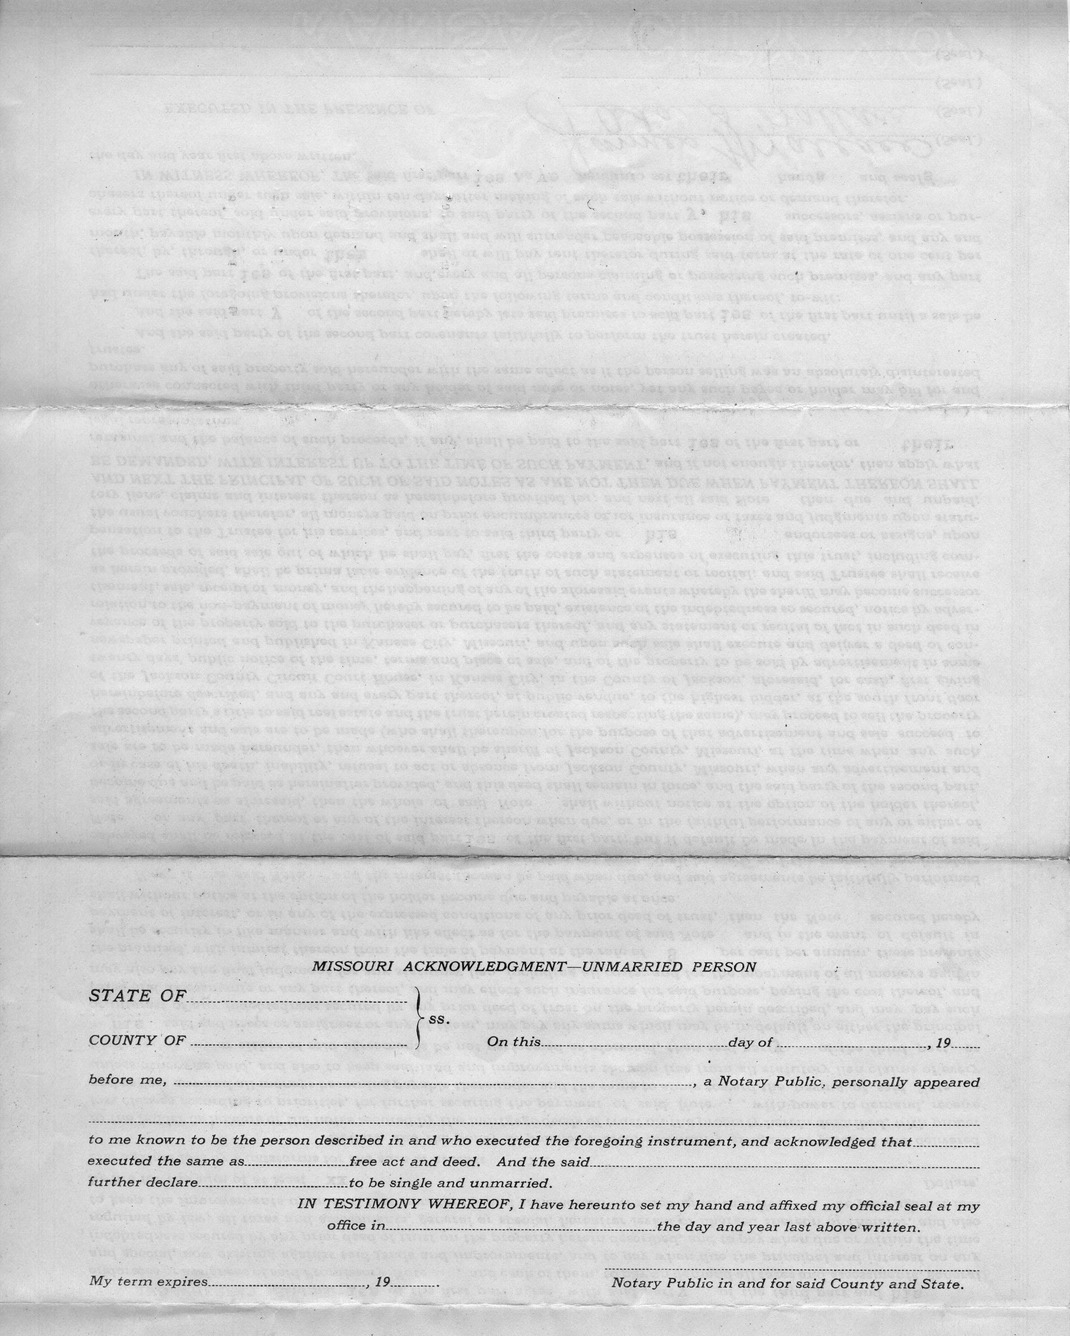 Deed of Trust from James H. Wallace and Ada S. Wallace to L. N. Manley for Mark Carhart